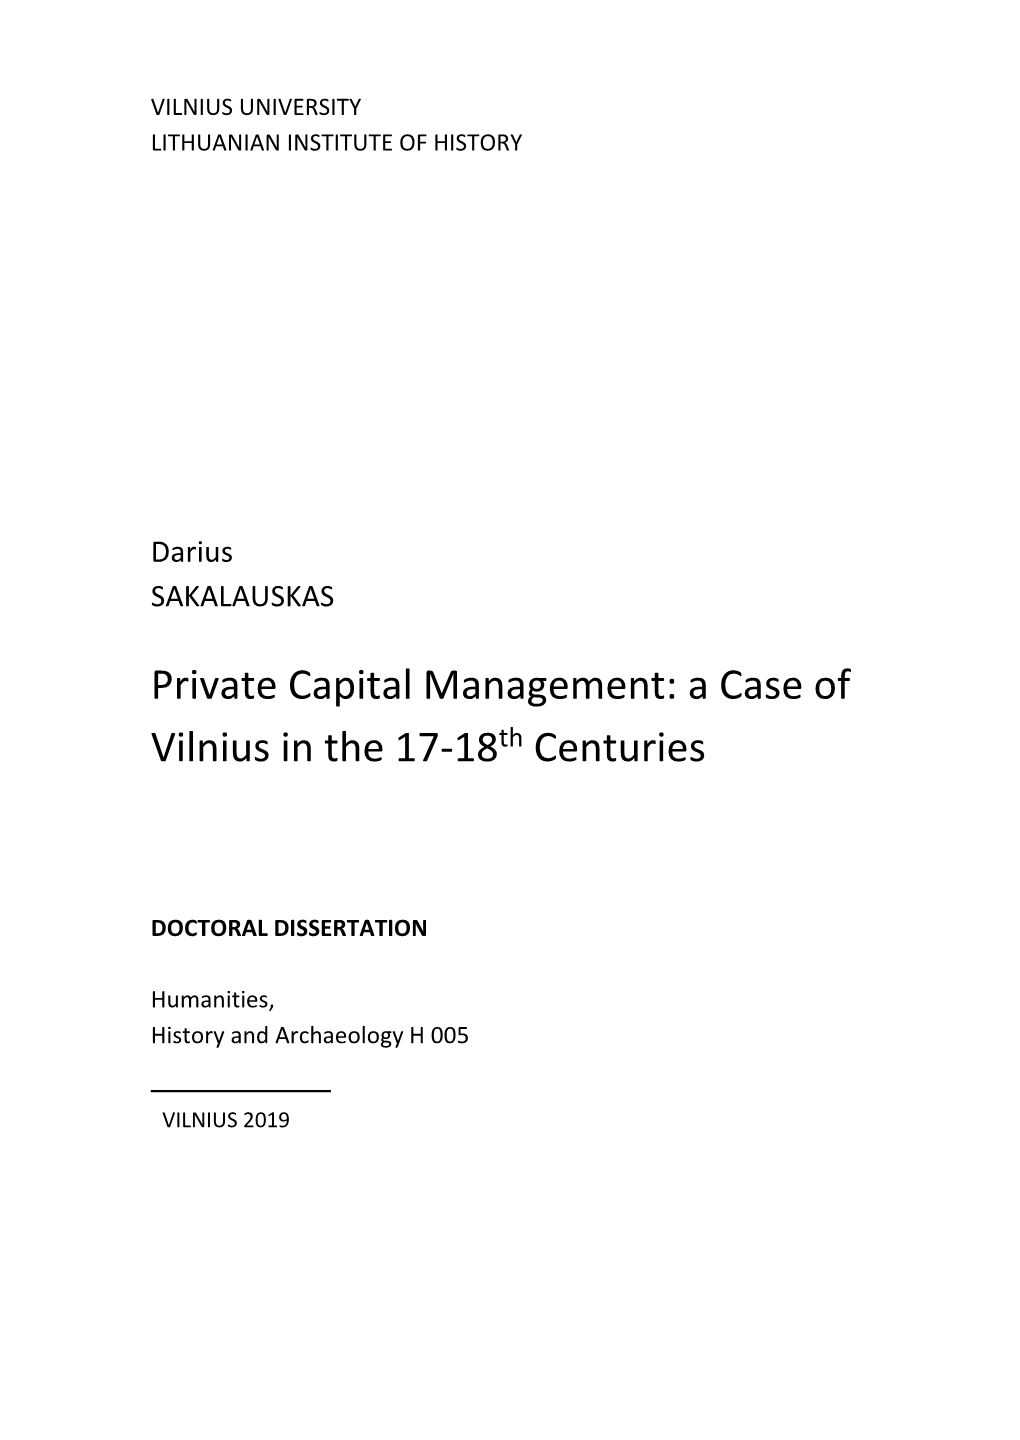 Private Capital Management: a Case of Vilnius in the 17-18Th Centuries